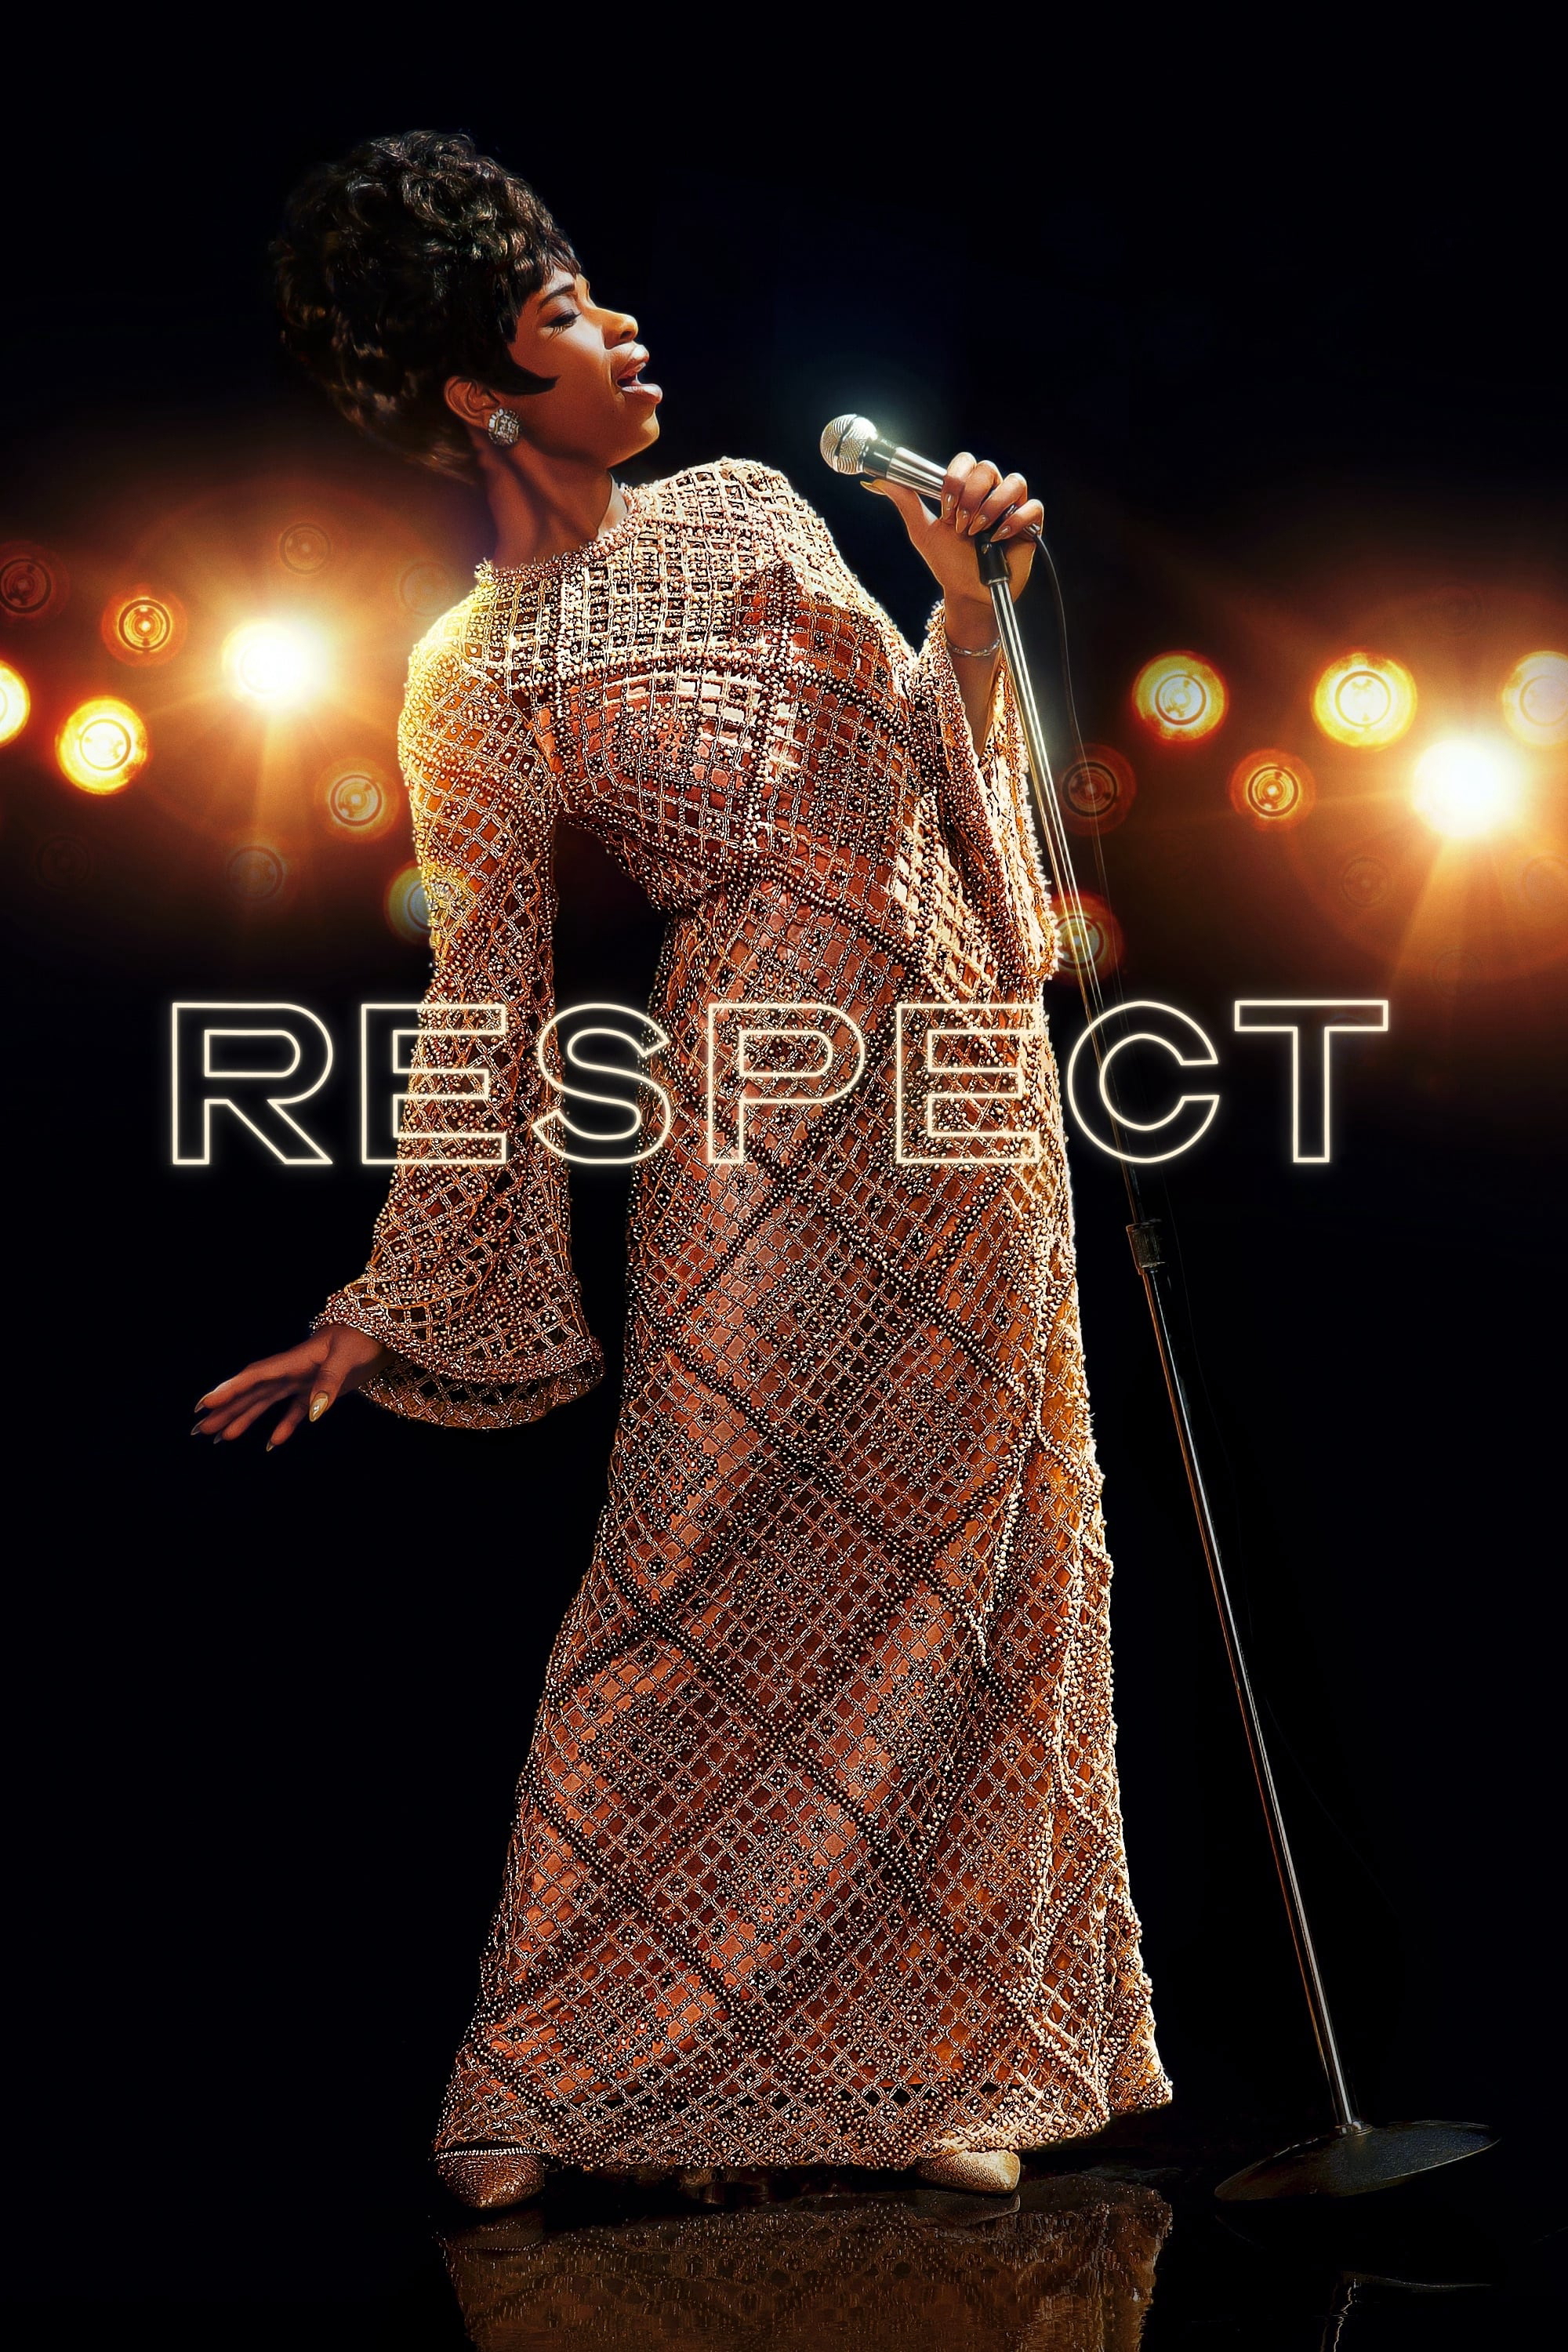 Poster Phim Respect: Một Huyền Thoại (Respect)